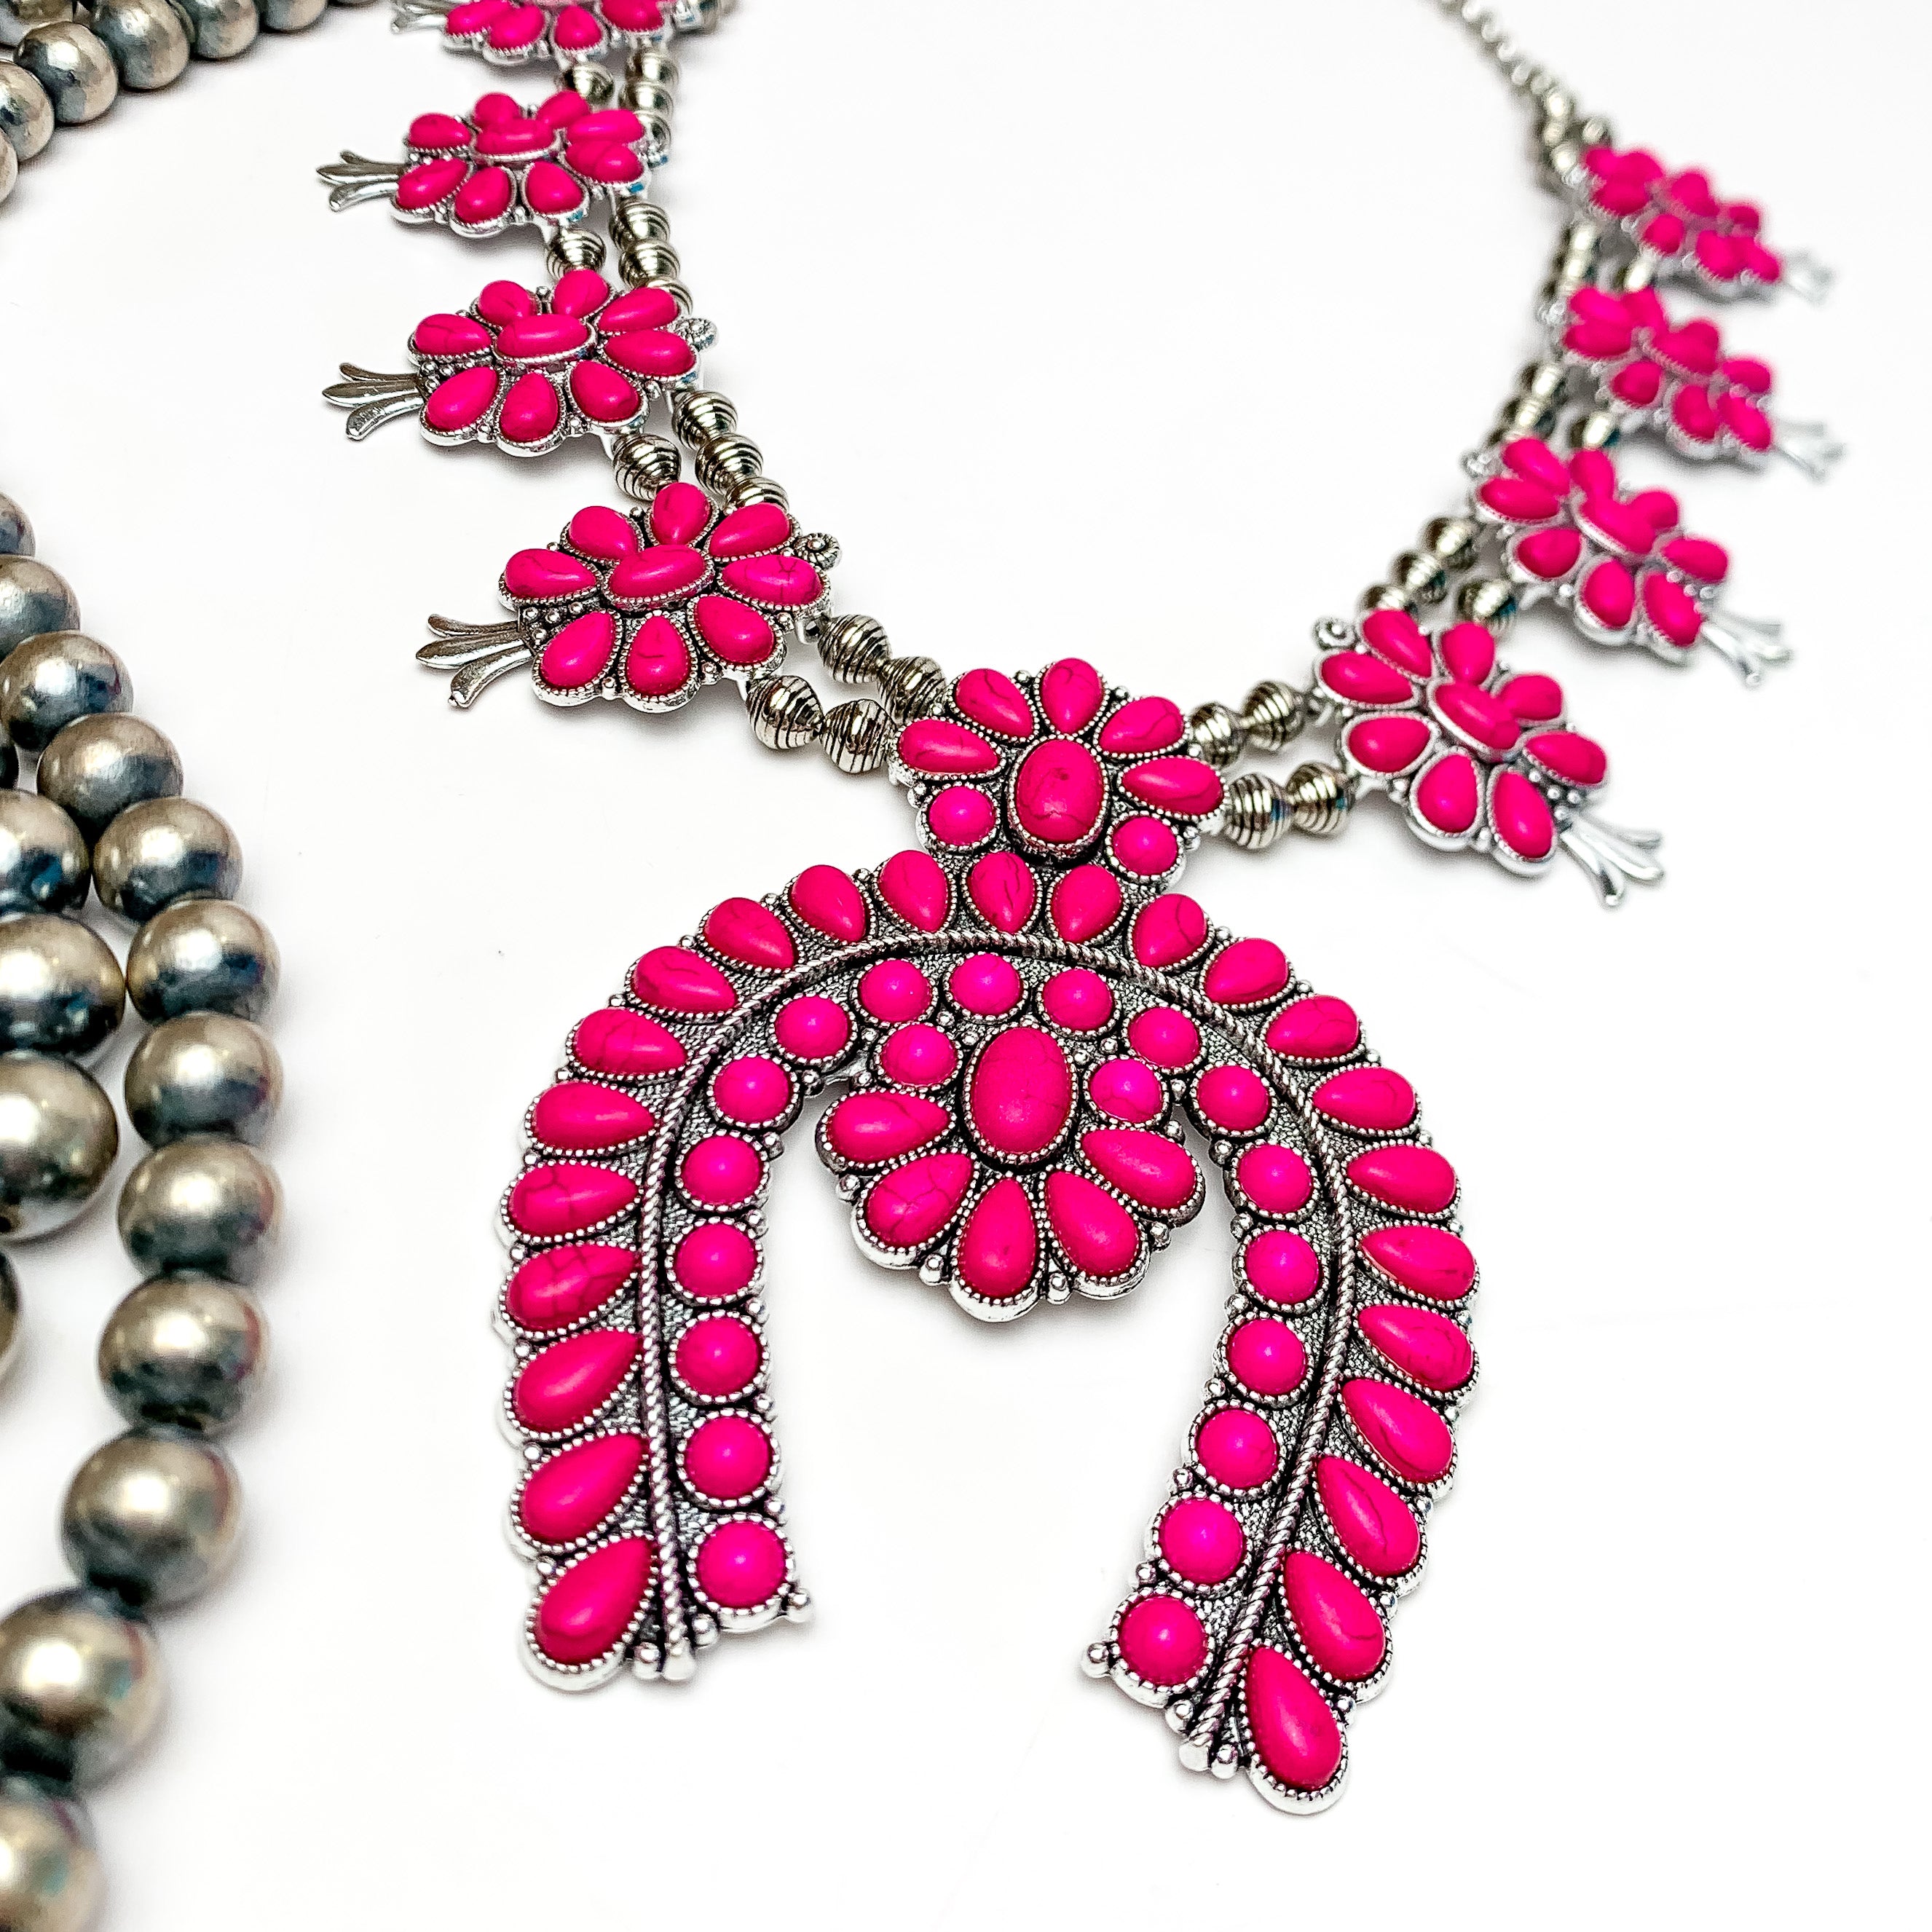 Western Women Squash Blossom Necklace in Hot Pink - Giddy Up Glamour Boutique